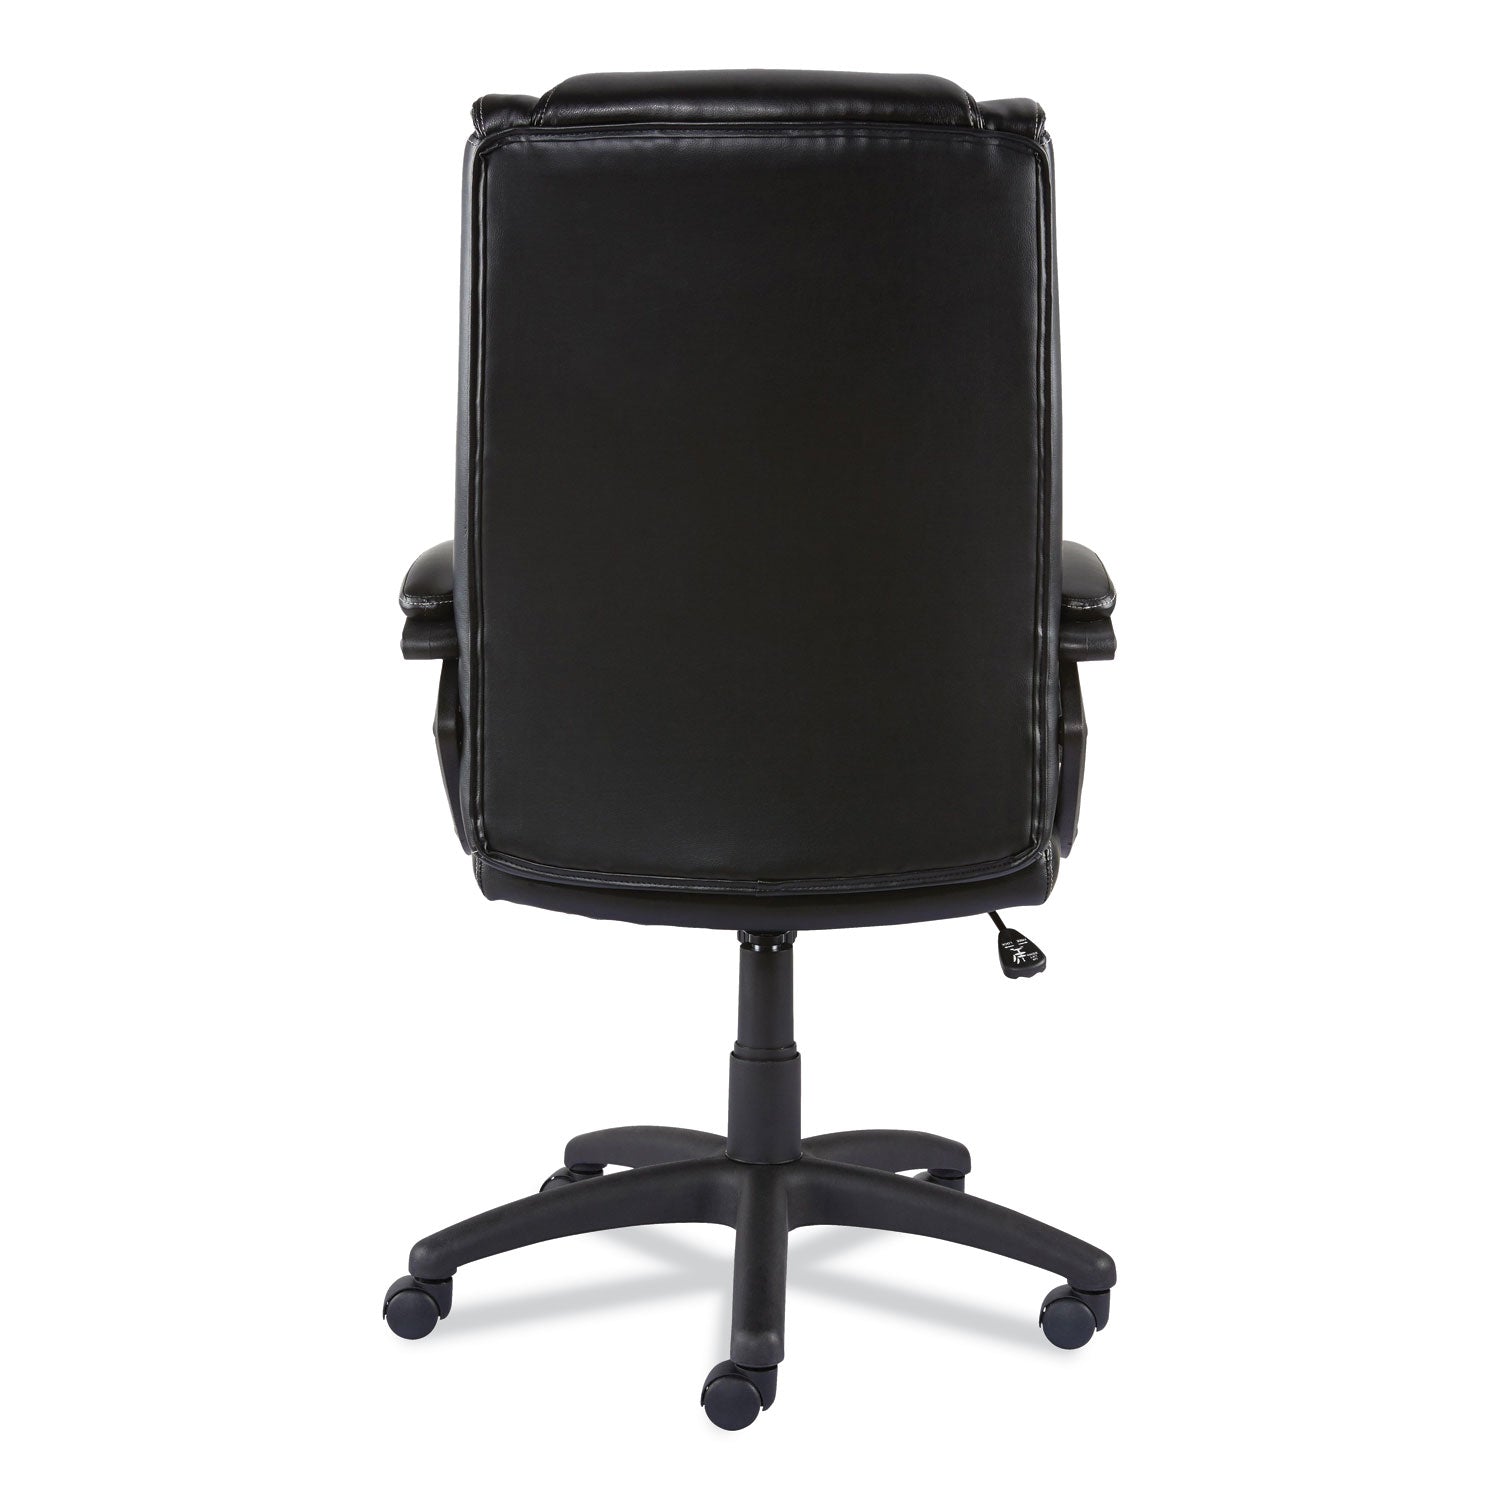 Alera Brosna Series Mid-Back Task Chair, Supports Up to 250 lb, 18.15" to 21.77 Seat Height, Black Seat/Back, Black Base - 2